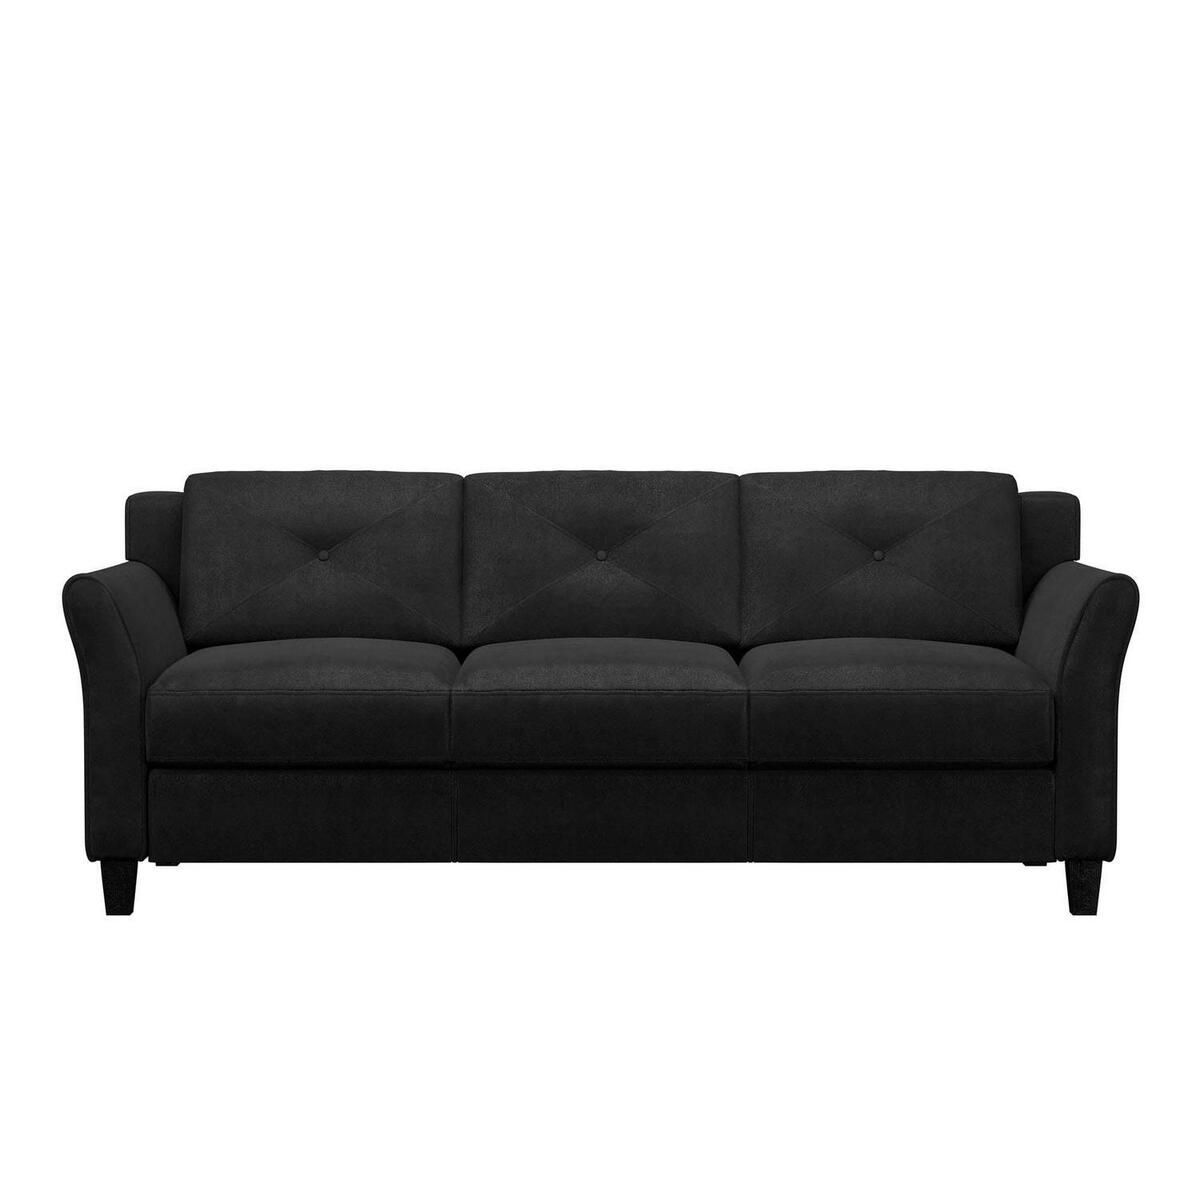 Traditional Sofa Curved Rolled Arms Comfortable Taryn Black Fabric | Ebay With Traditional Black Fabric Sofas (Photo 4 of 15)